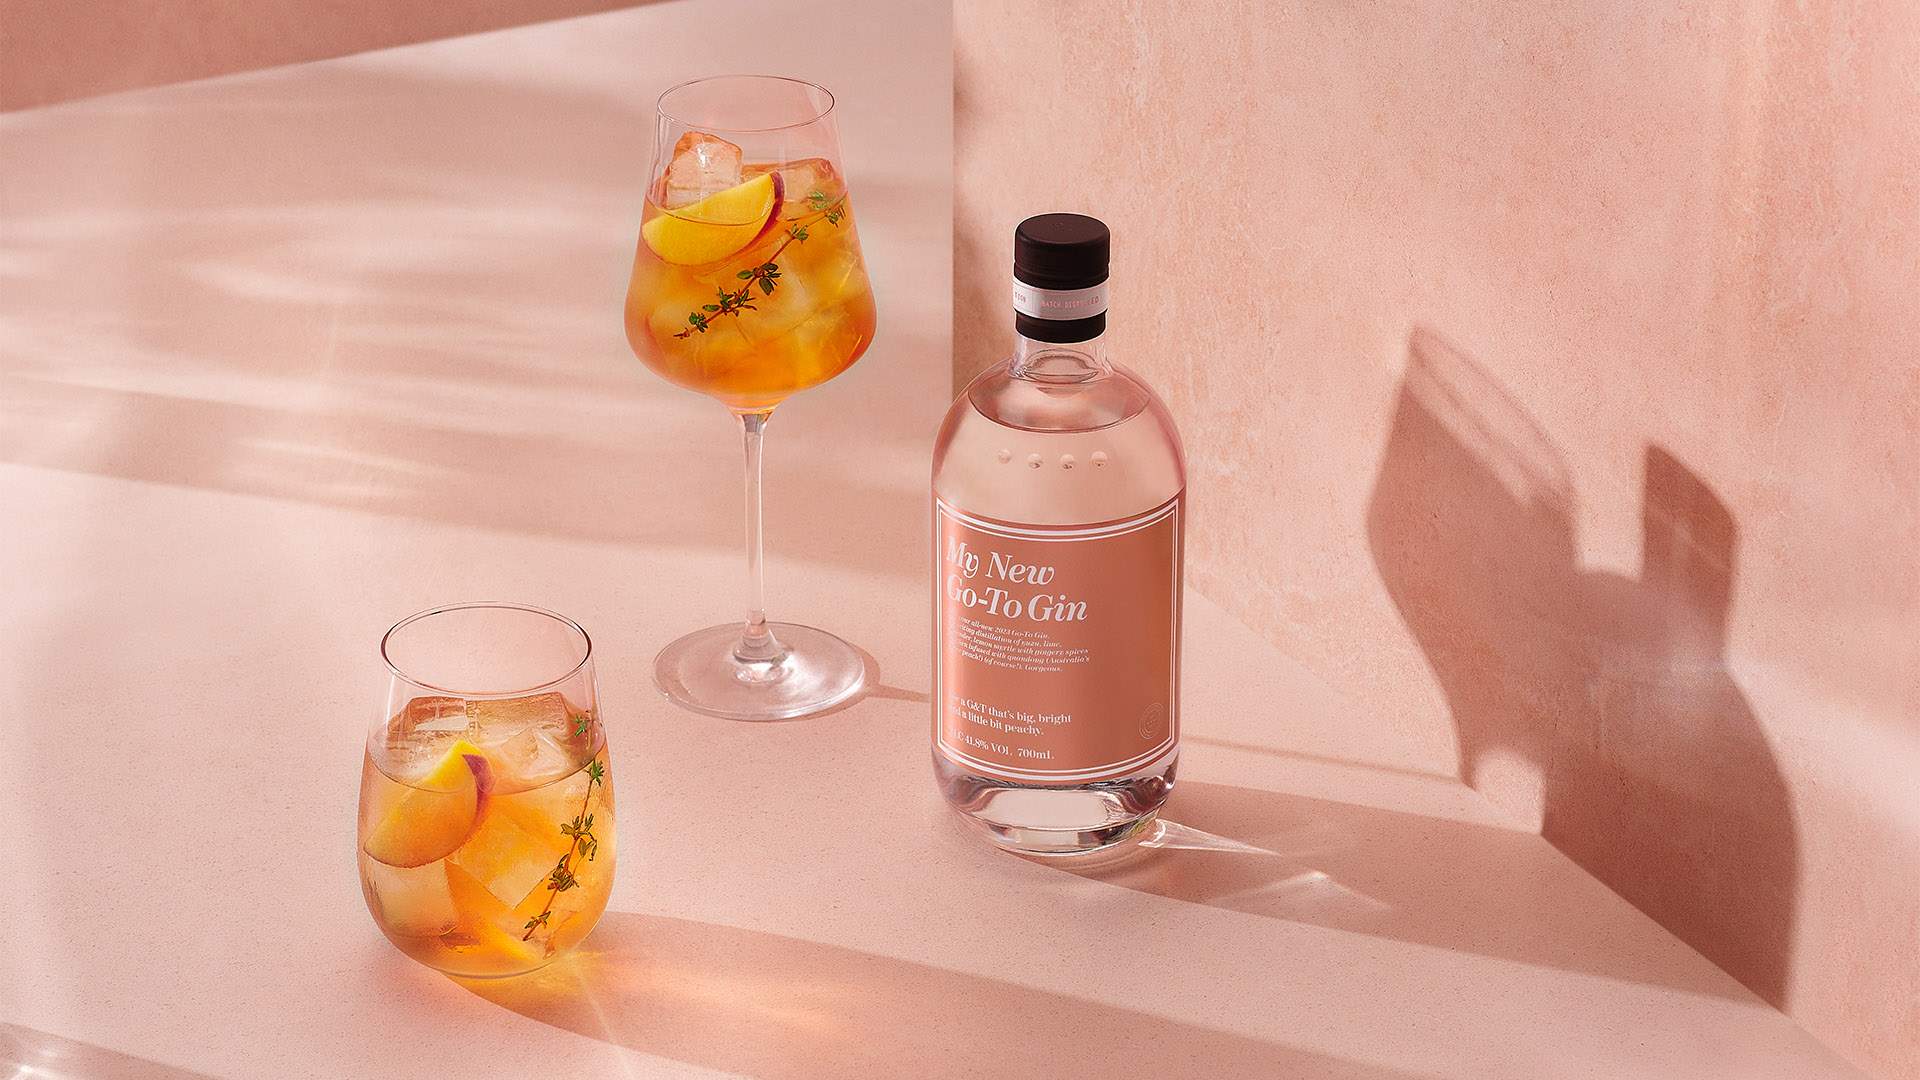 Four Pillars and Go-To Skincare's Limited-Edition Go-To Gin Collaboration Is Back for a Third Year